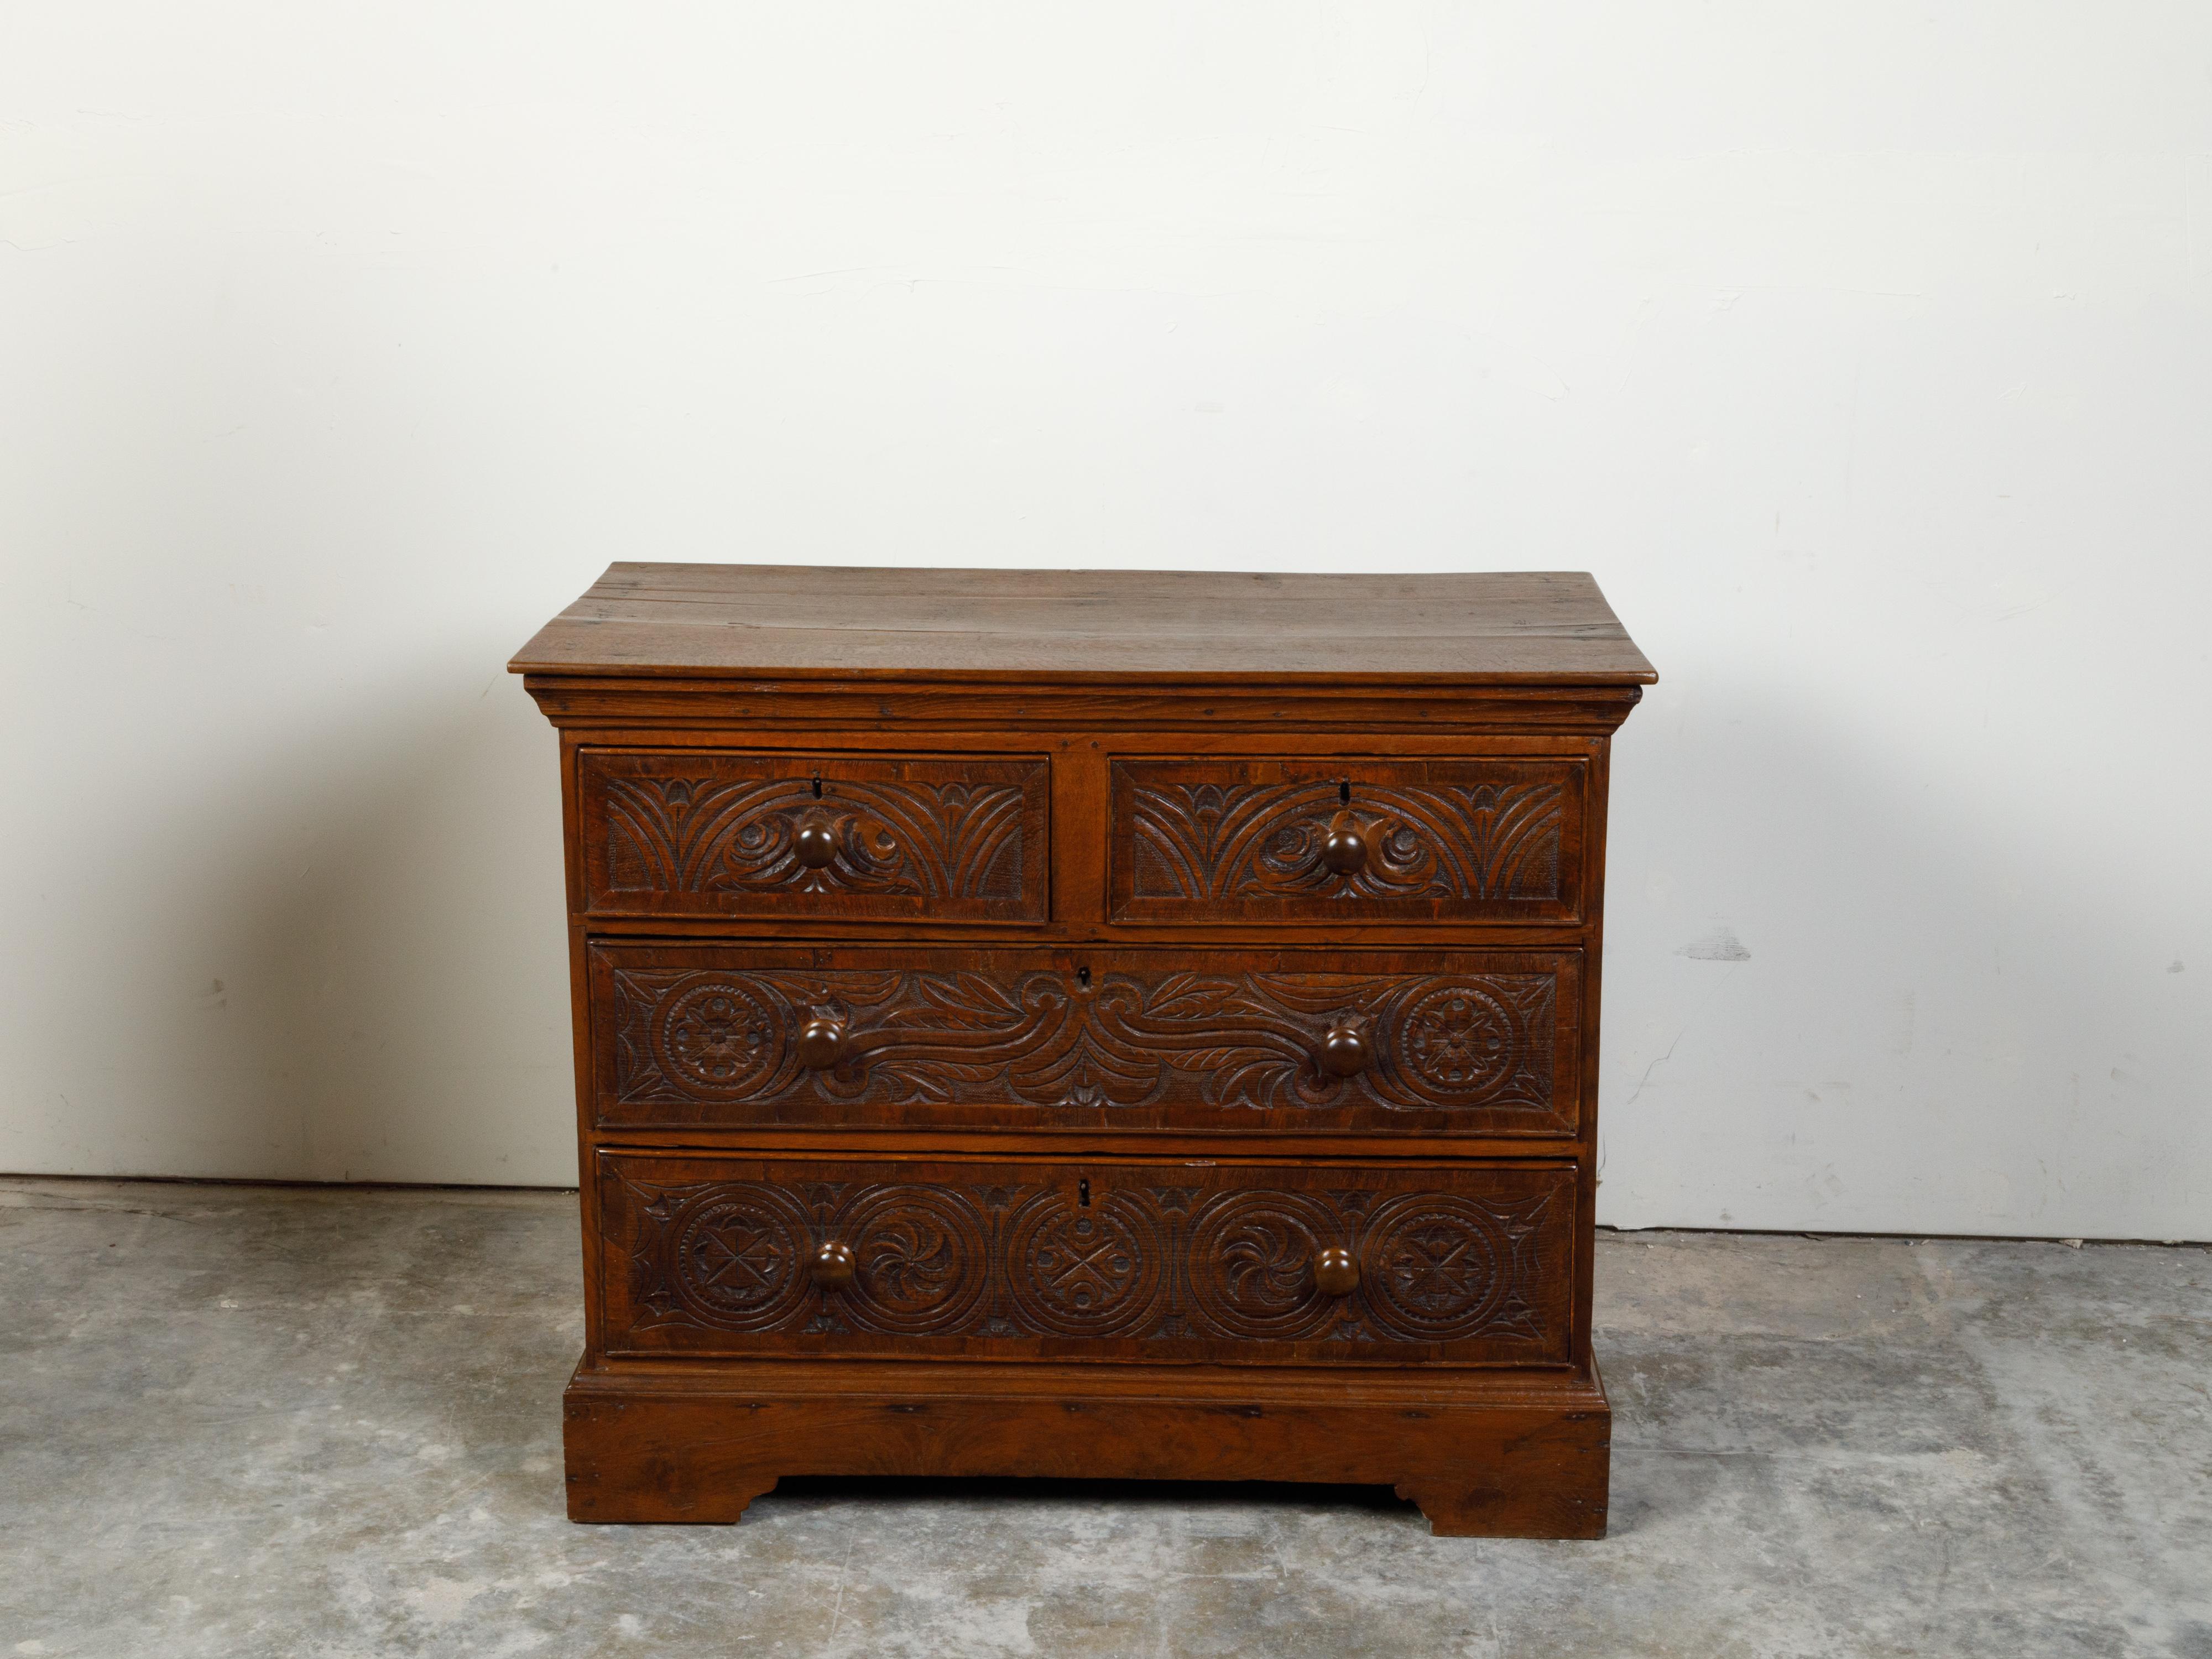 An English Georgian period oak chest from the early 19th century, with four drawers and carved motifs. Created in England during the early years of the 20th century, this oak chest features a rectangular top sitting above two small drawers followed